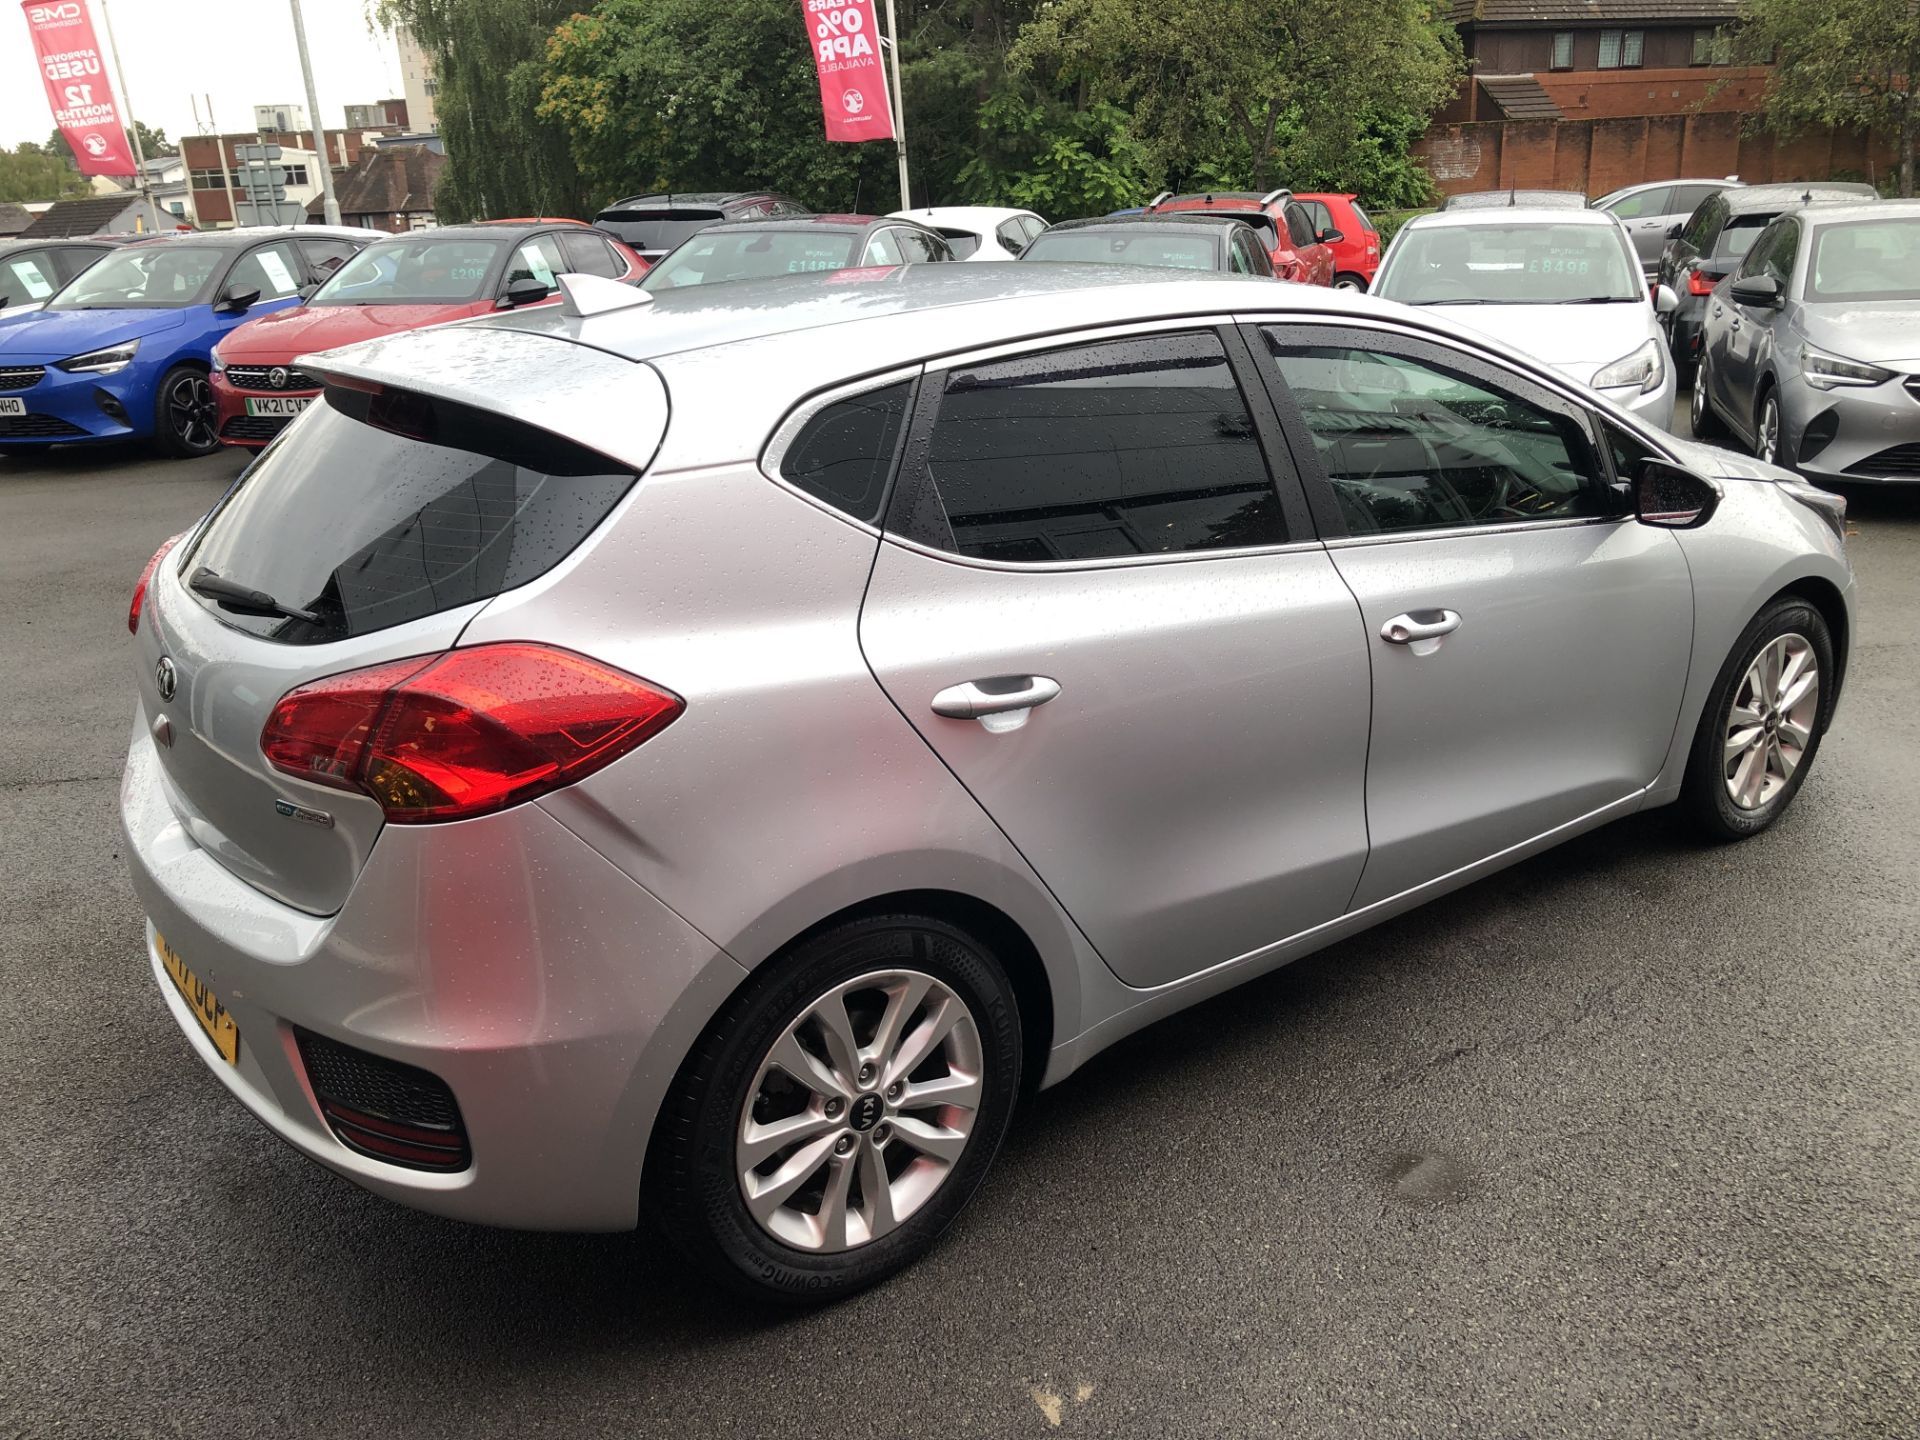 Kia Ceed 1.6 CRDi ISG 2 5dr, Registration: WF17UCP, Date First Registered: 30/08/2017, Odometer - Image 5 of 7